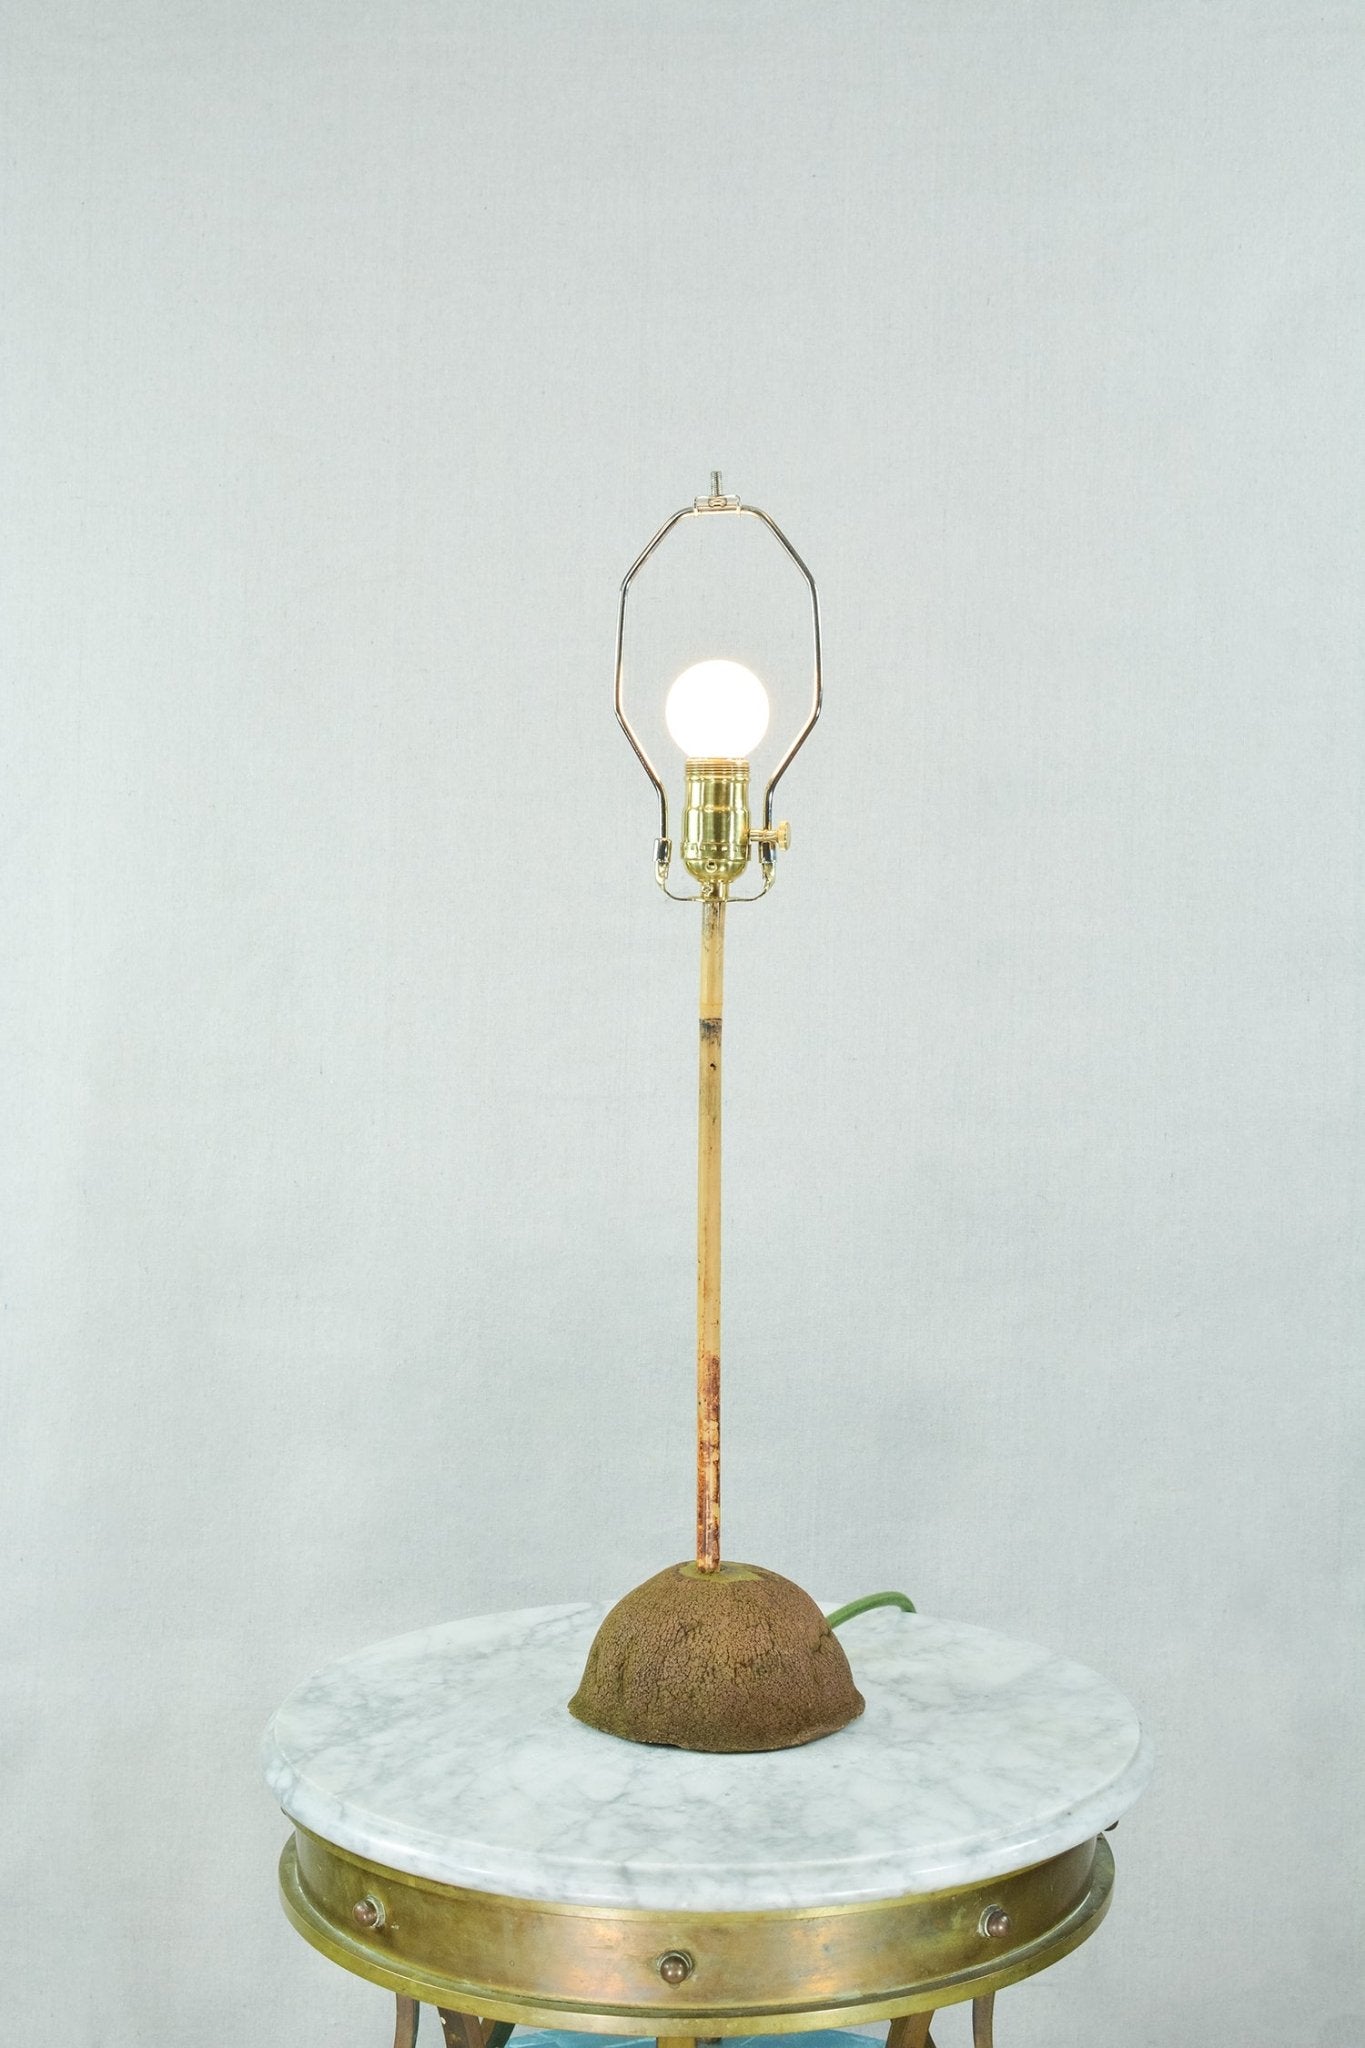 'Prairie Modern' Bamboo Table Lamp with Coconut Base and Vintage Japanese Parasol Shade — Model No. 017 - Tennant New York